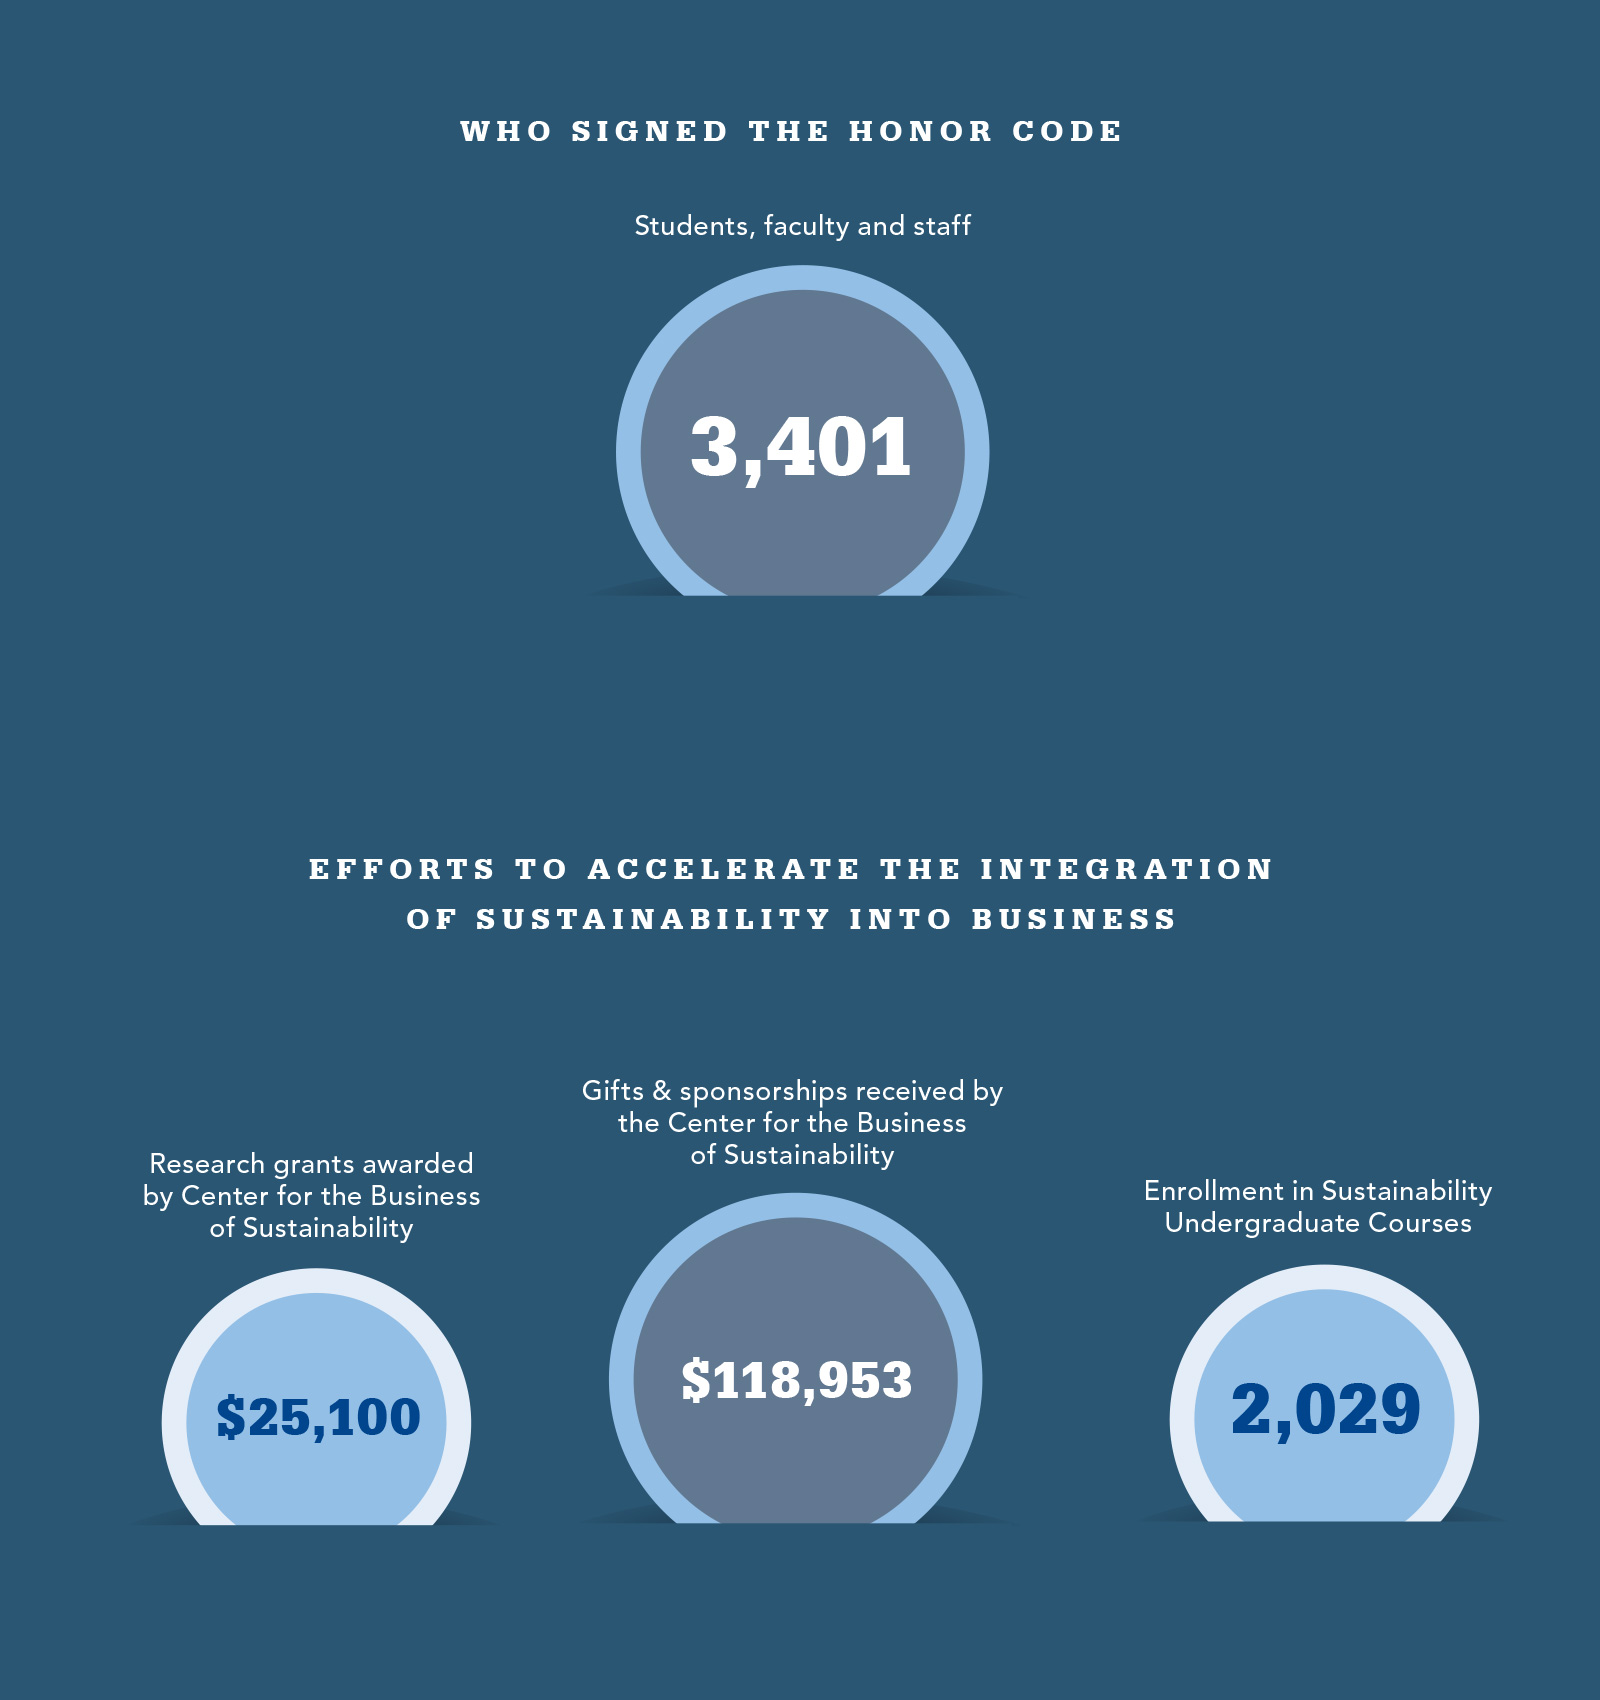 Smeal By The Numbers - Making Business Better